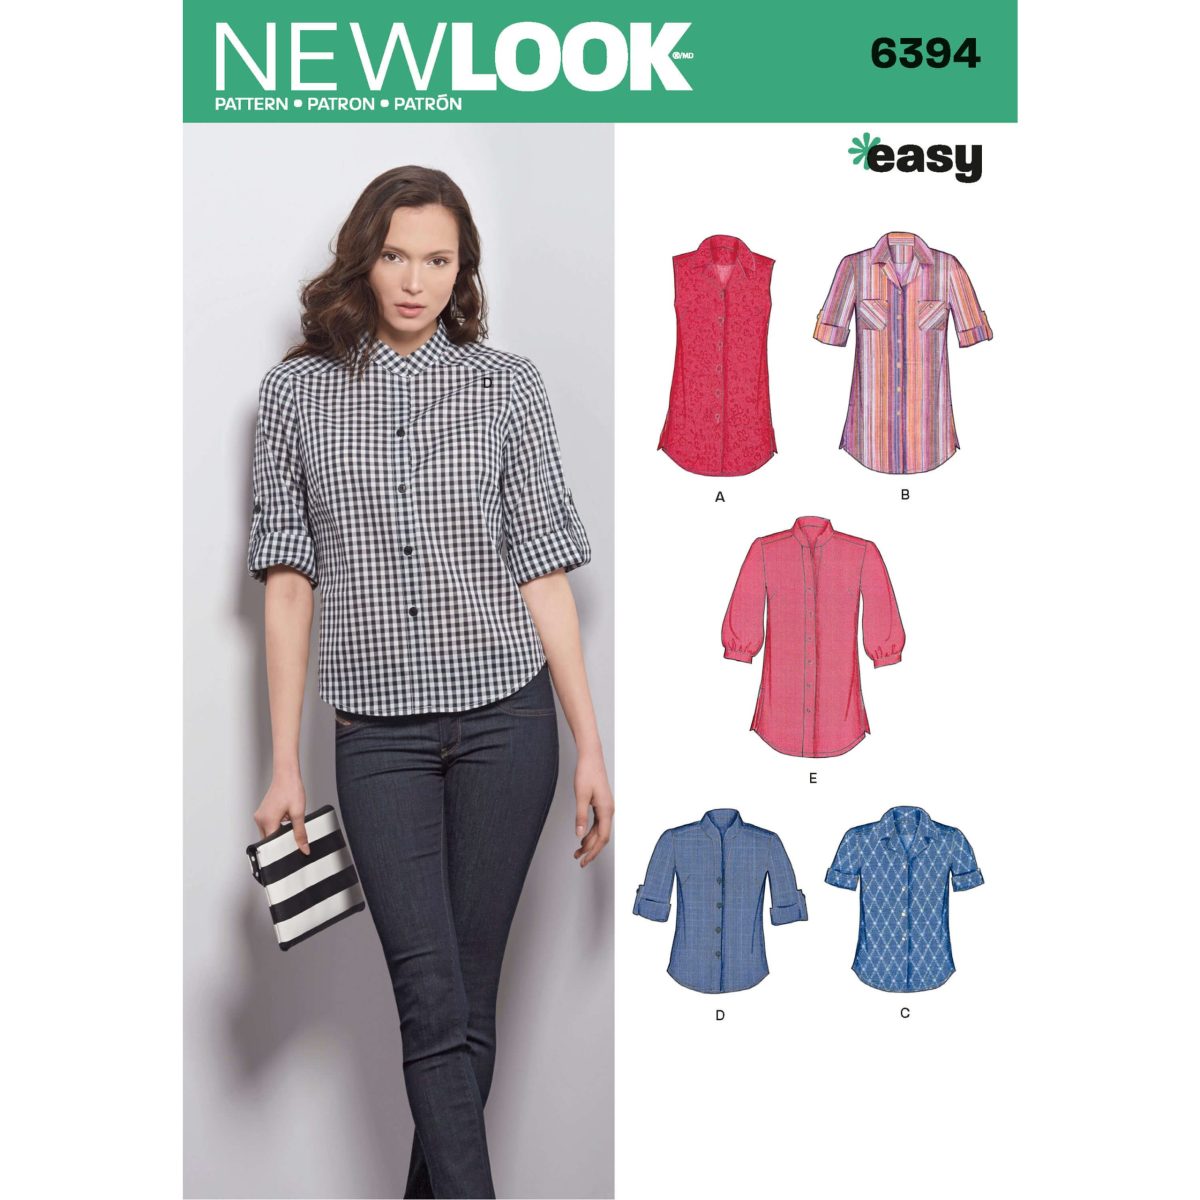 New Look Sewing Pattern 6394 Women's Button Front Tops